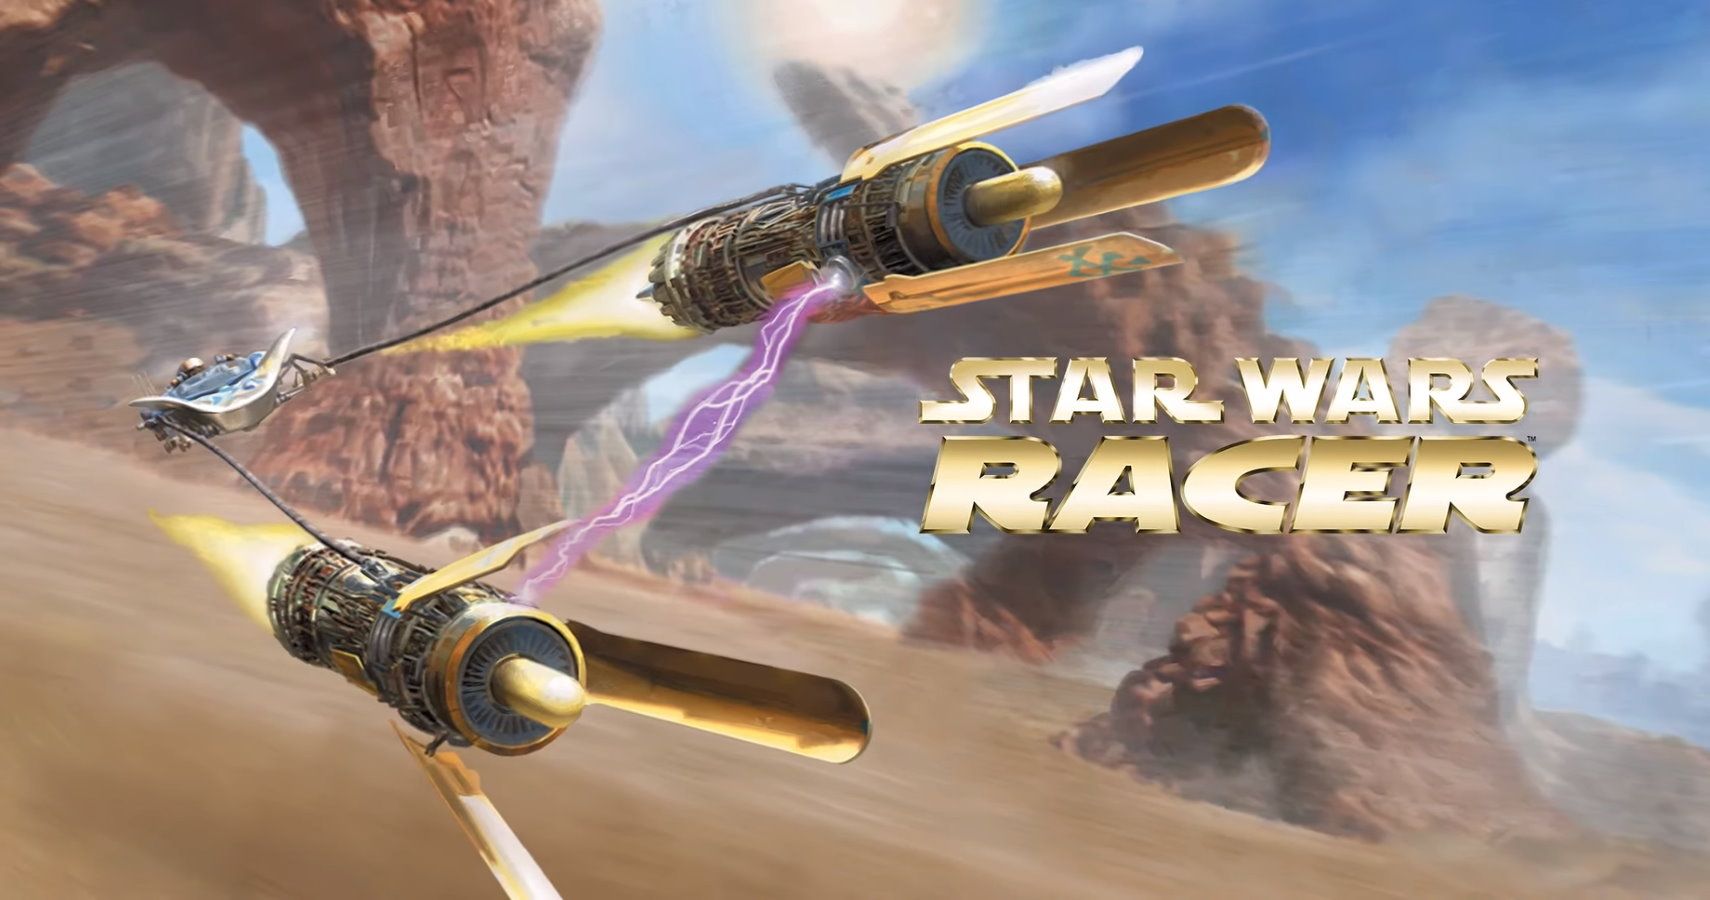 Cult Classic Star Wars Episode 1 Racer Announced For Switch During Latest Nintendo Direct